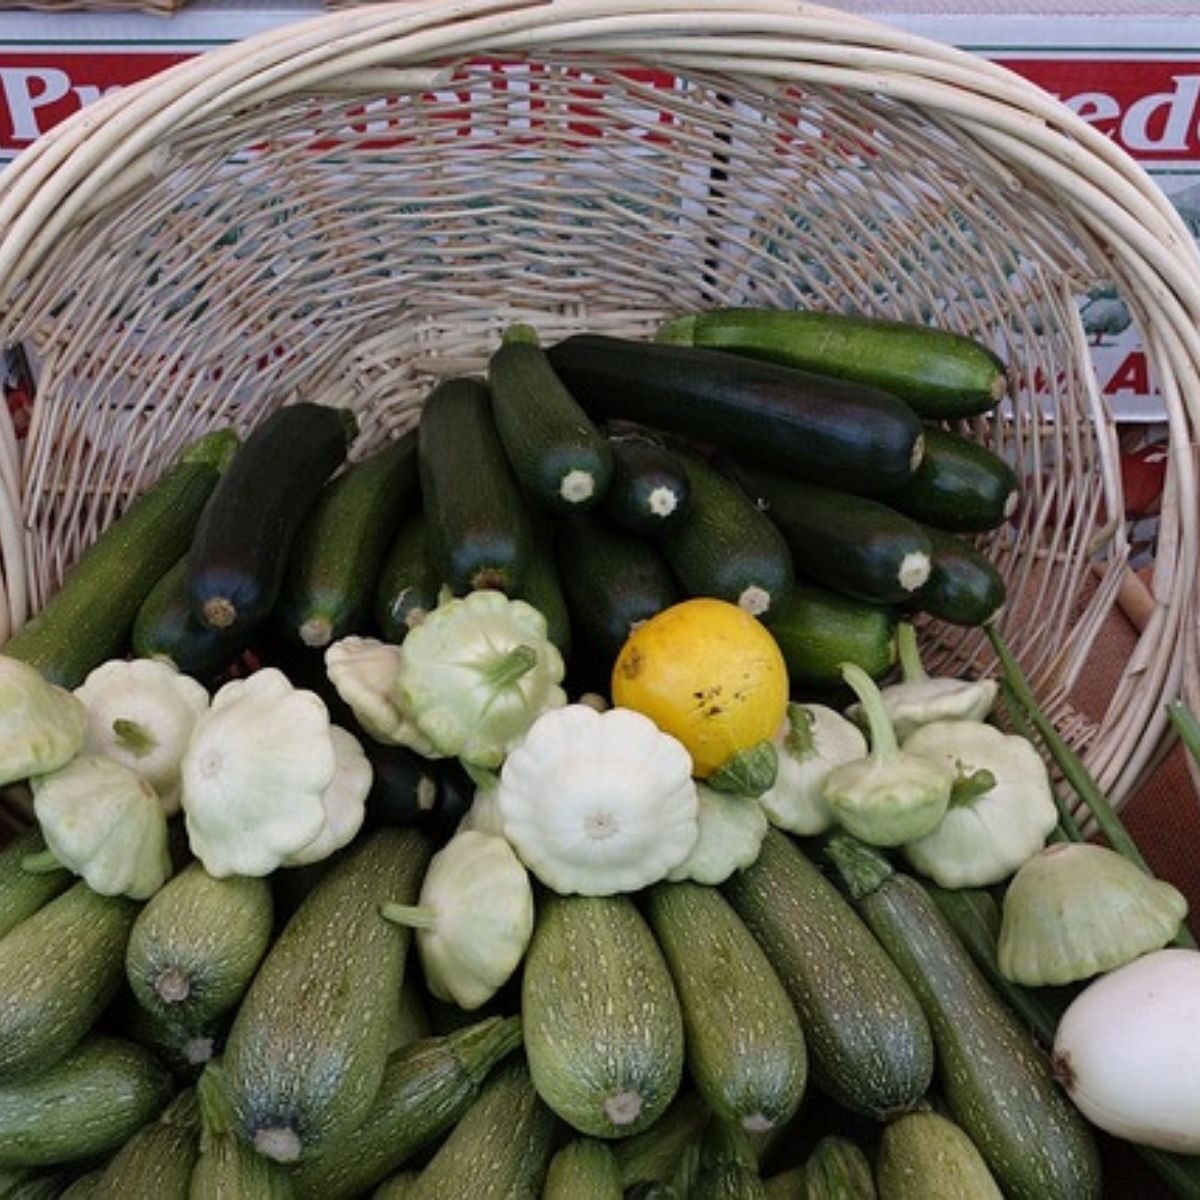 basket of vining vegetables including zucchini, and squash